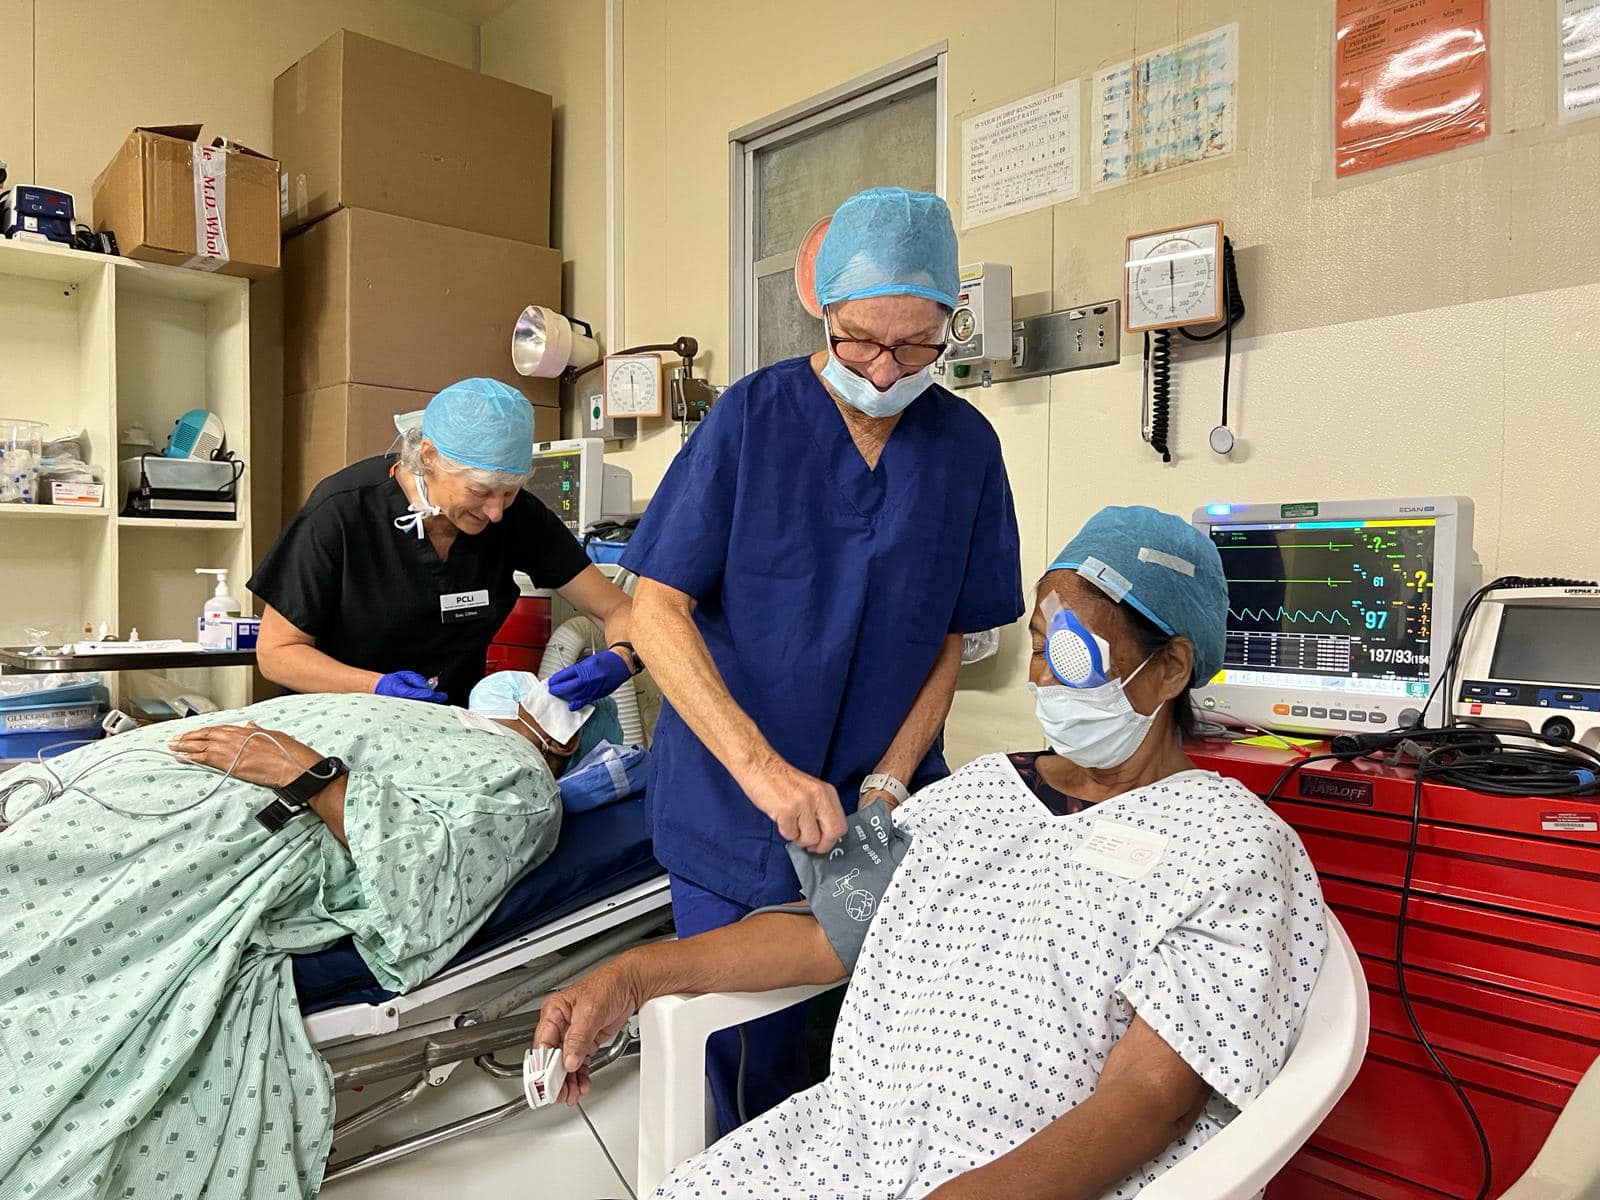 HISTORIC MILESTONES ACHIEVED IN OPHTHALMIC CARE: COMPLETION OF CANVASBACK MISSION IN MAJURO ATOLL